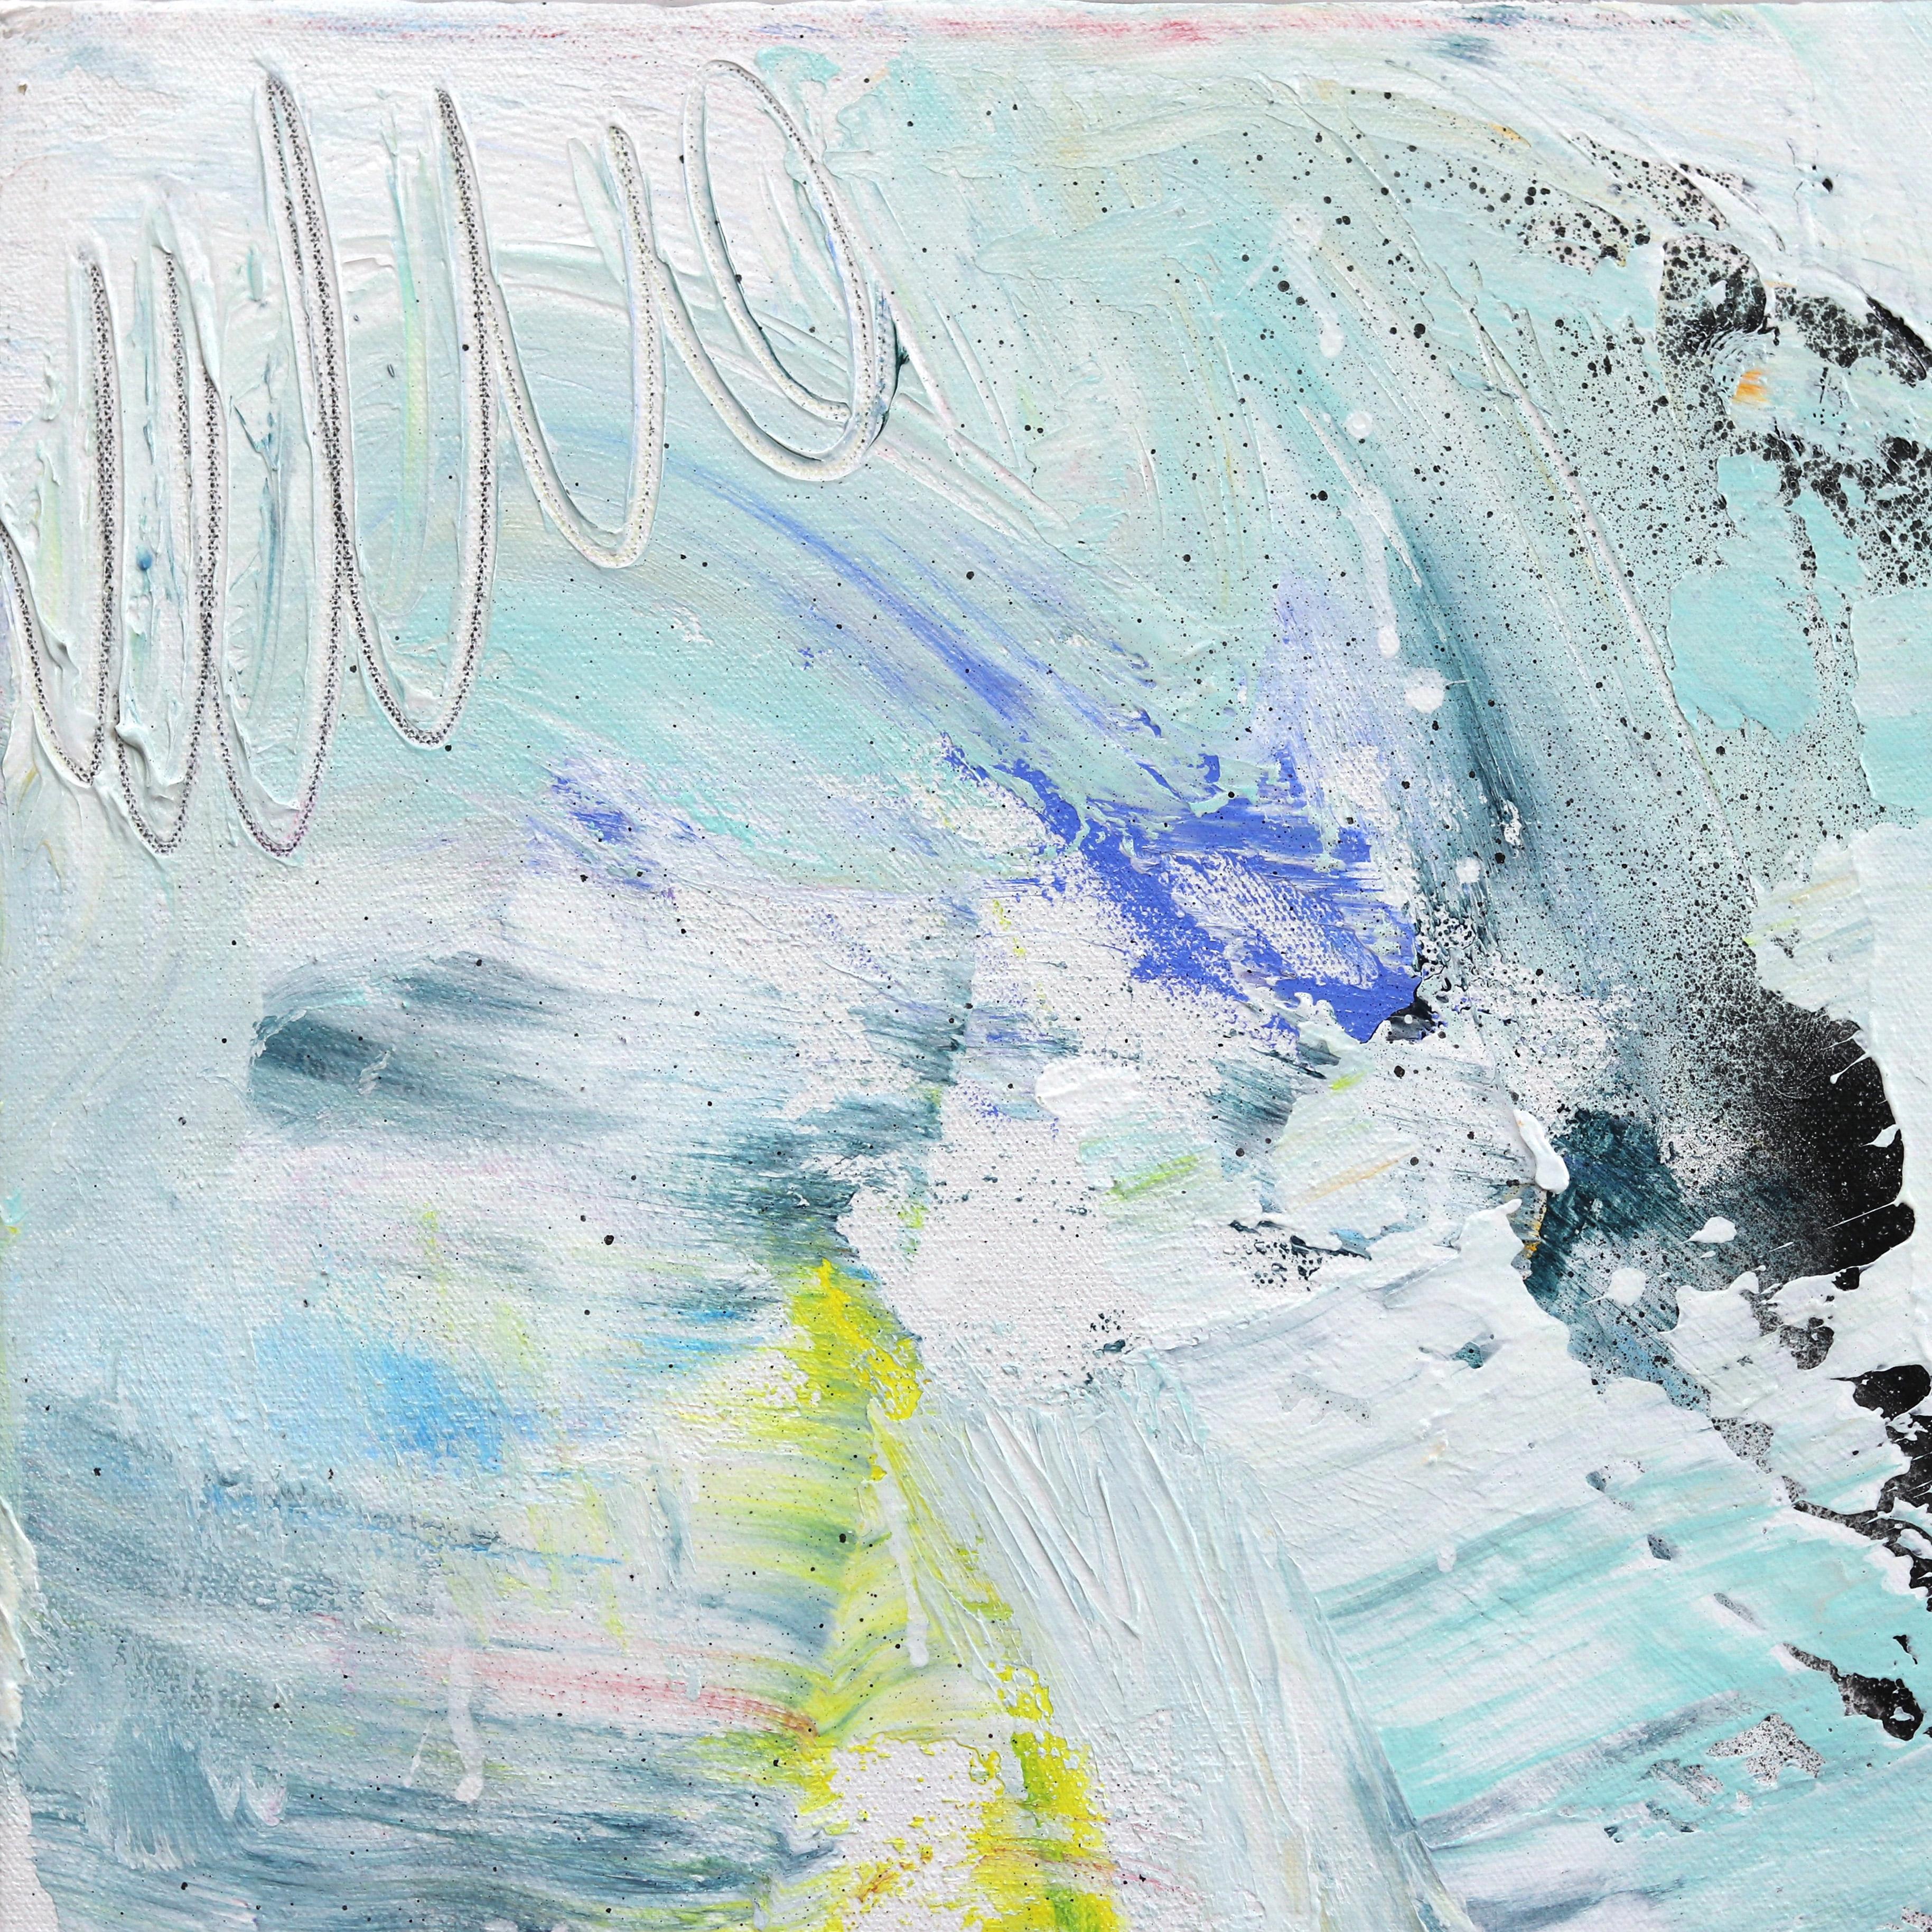 Los Angeles artist Amber Goldhammer paints dramatic abstract compositions in acrylic on canvas featuring energetic brushstrokes. Goldhammer uses her contemporary paintings to express emotions akin to silent poetry while drawing inspiration for her